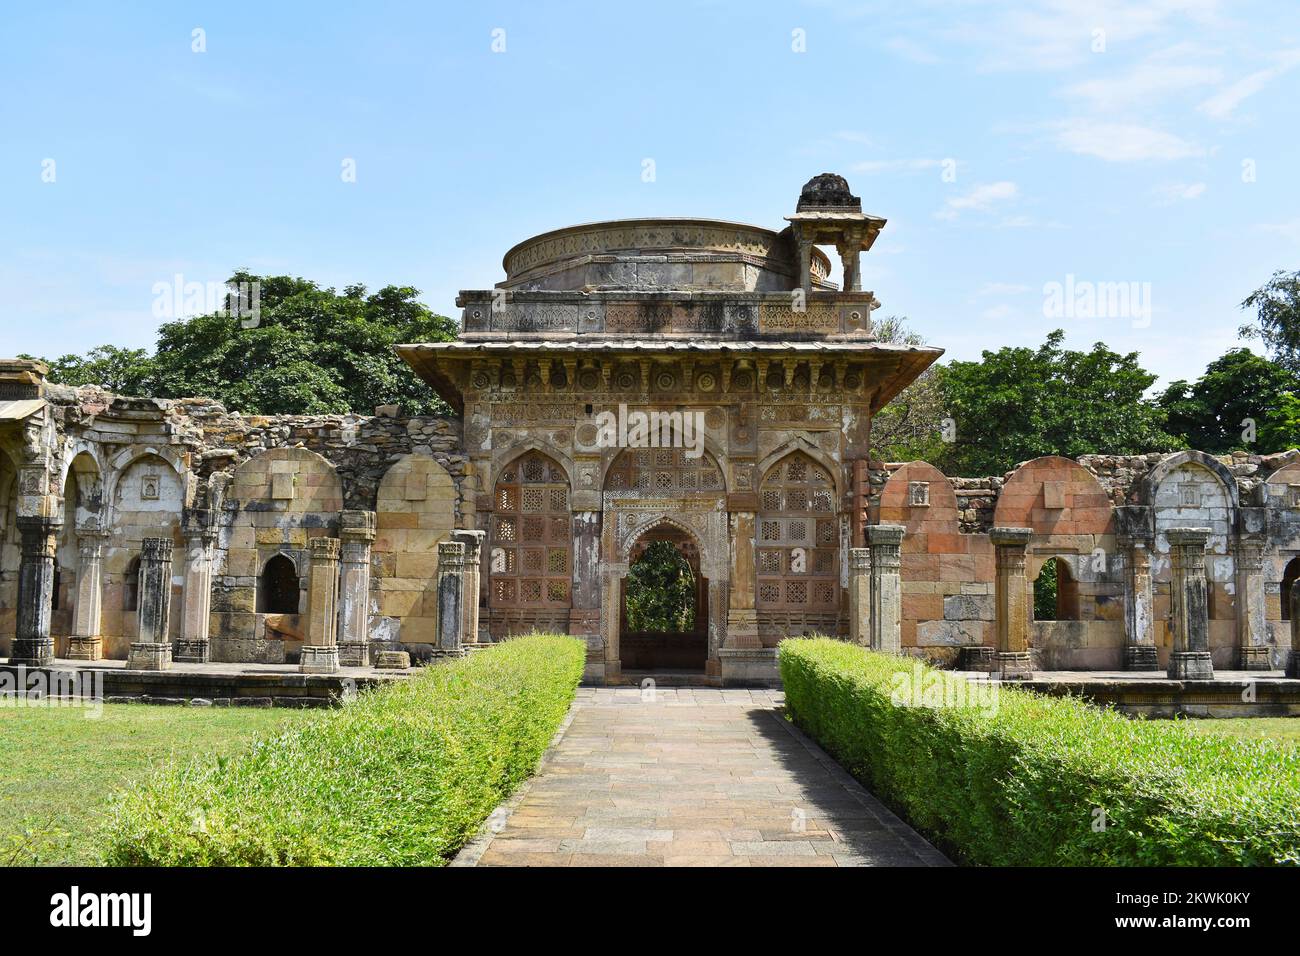 Architectural Archway and courtyard infront of Jami Masjid with intricate carvings in stone, an Islamic monuments was built by Sultan Mahmud Begada in Stock Photo